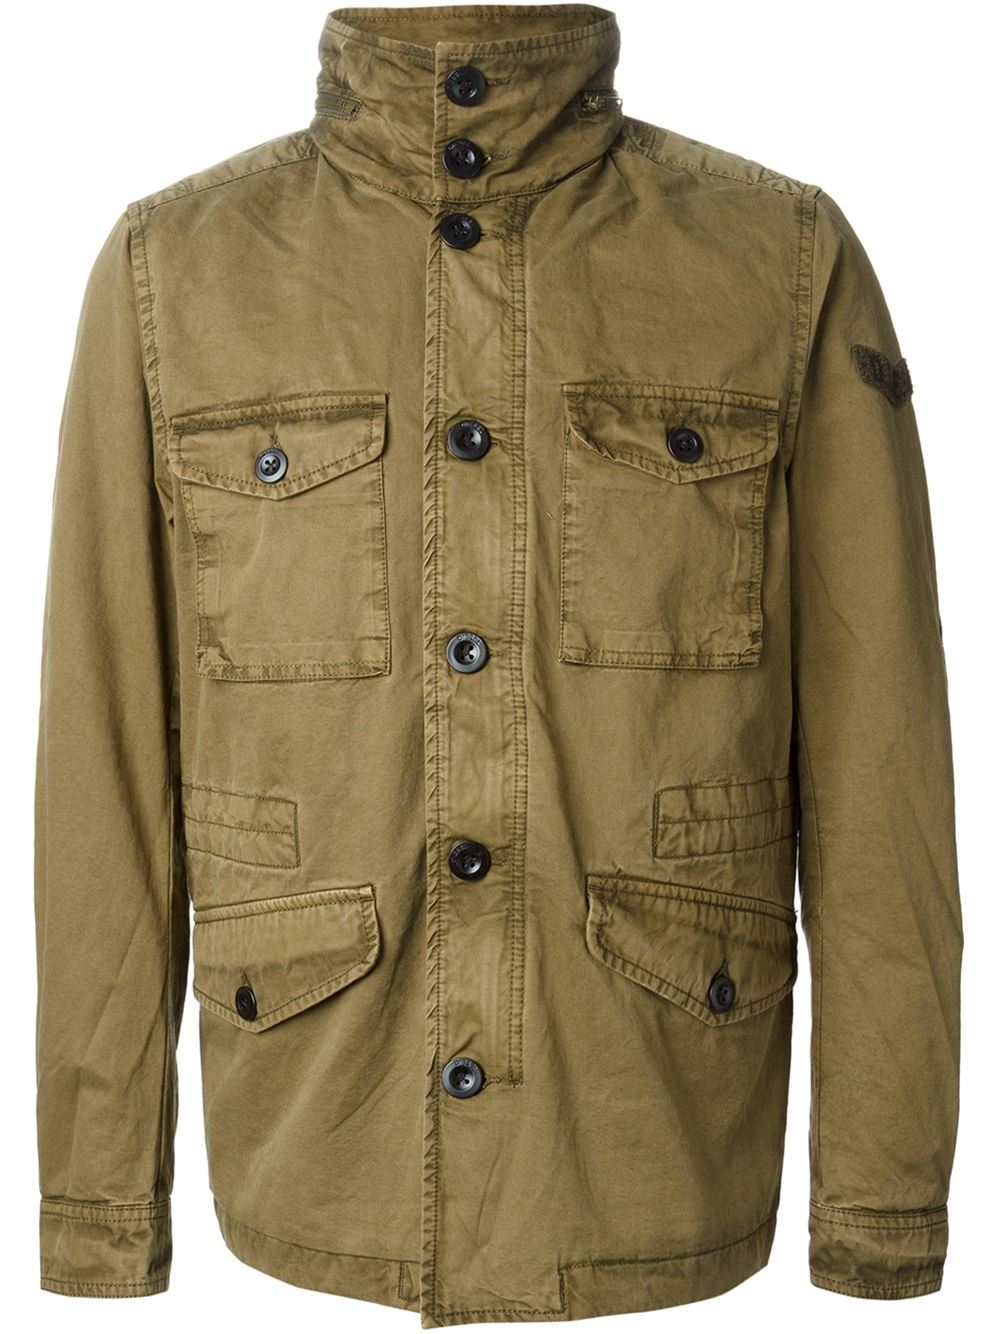 Lyst - Diesel Military Style Jacket in Green for Men